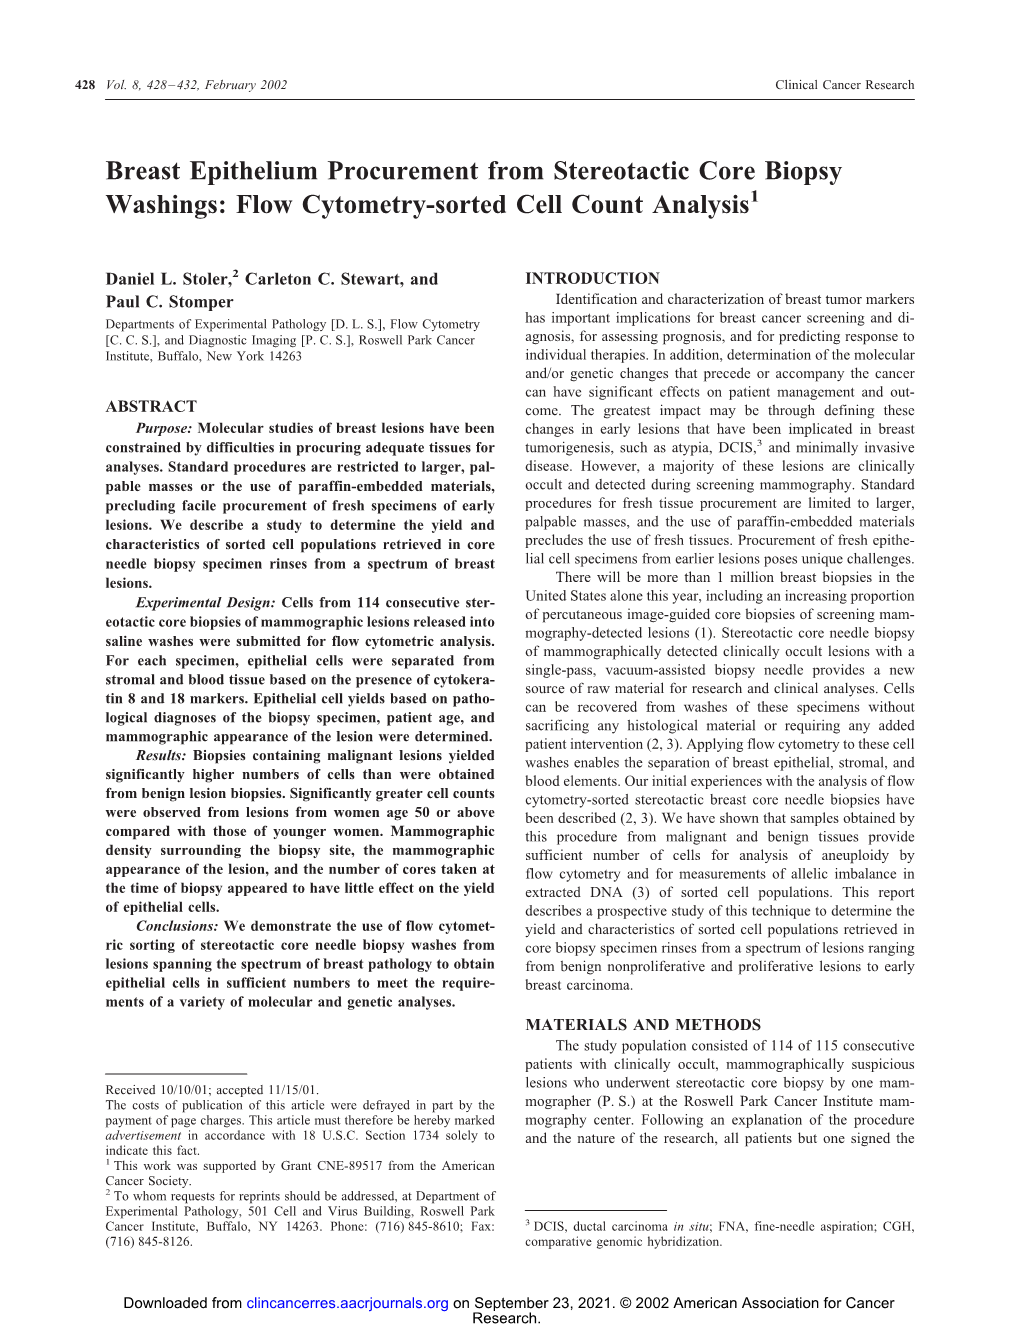 Breast Epithelium Procurement from Stereotactic Core Biopsy Washings: Flow Cytometry-Sorted Cell Count Analysis1